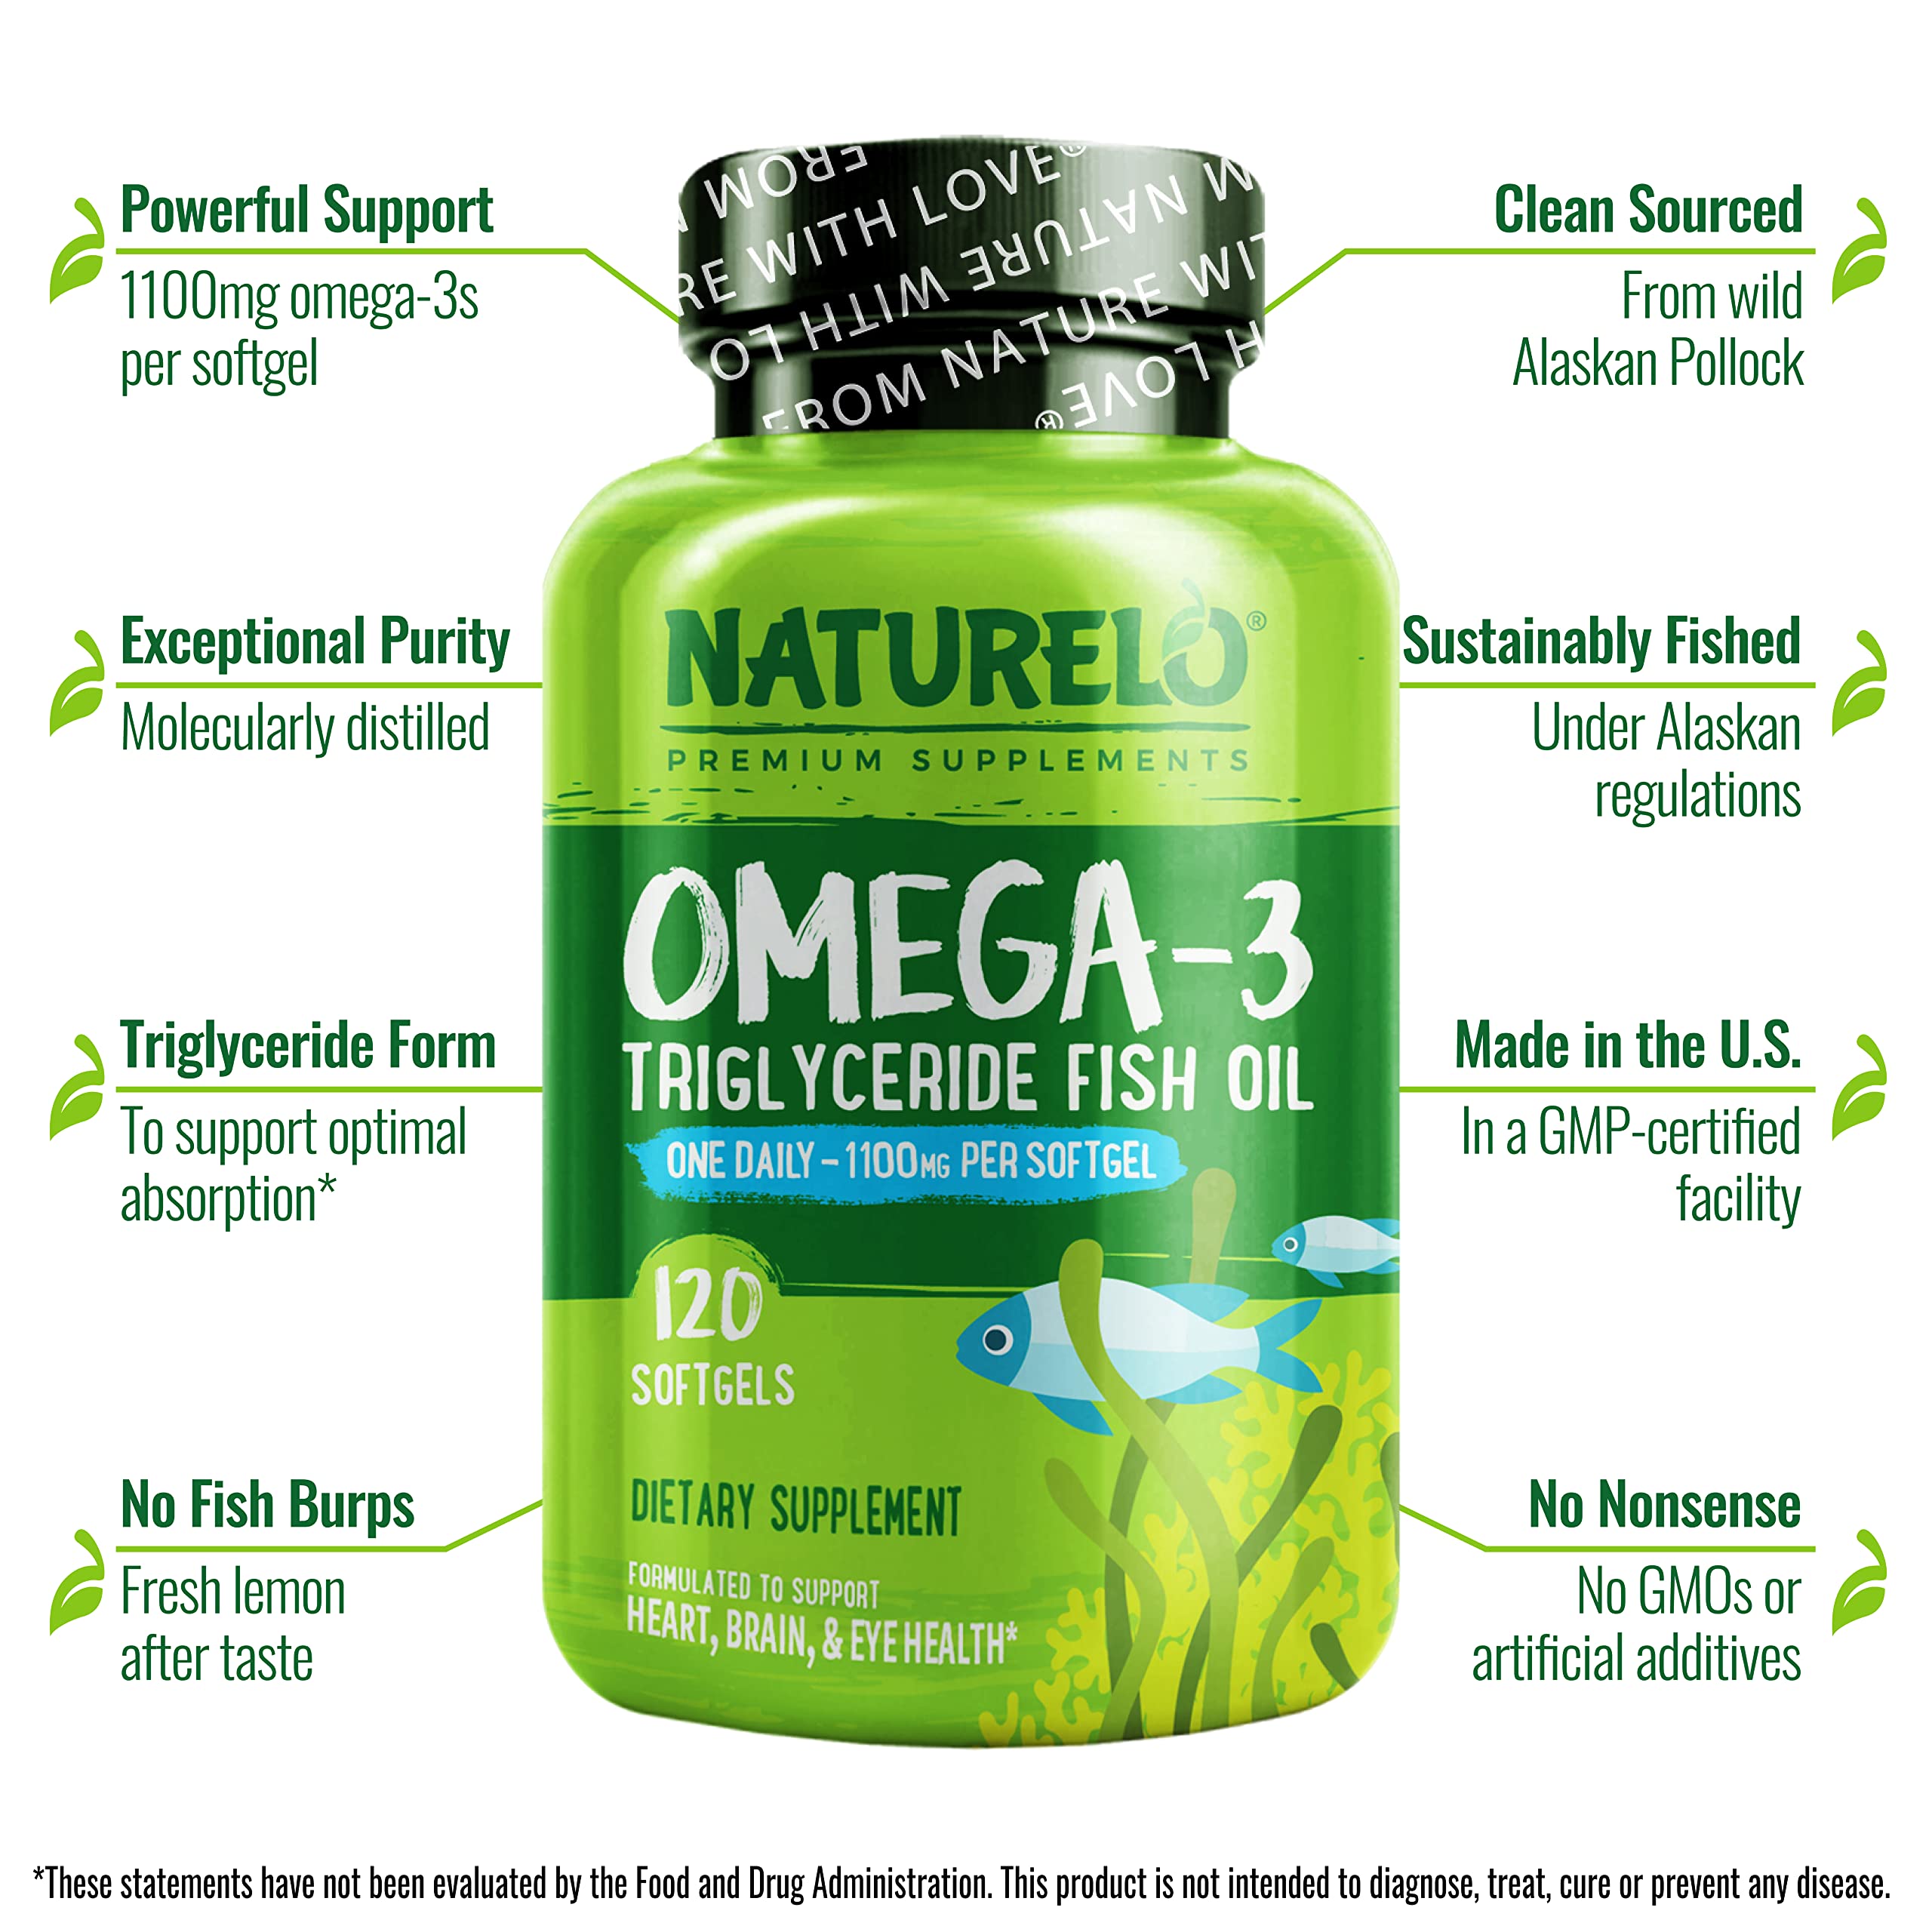 NATURELO Omega-3 Fish Oil Supplement - EPA + DHA - 1100 mg Triglyceride Omega-3 per Gel - One A Day - for Heart, Eye, Brain, Joint Health - No Burps - Lemon Flavor - 120 Softgels | 4 Month Supply